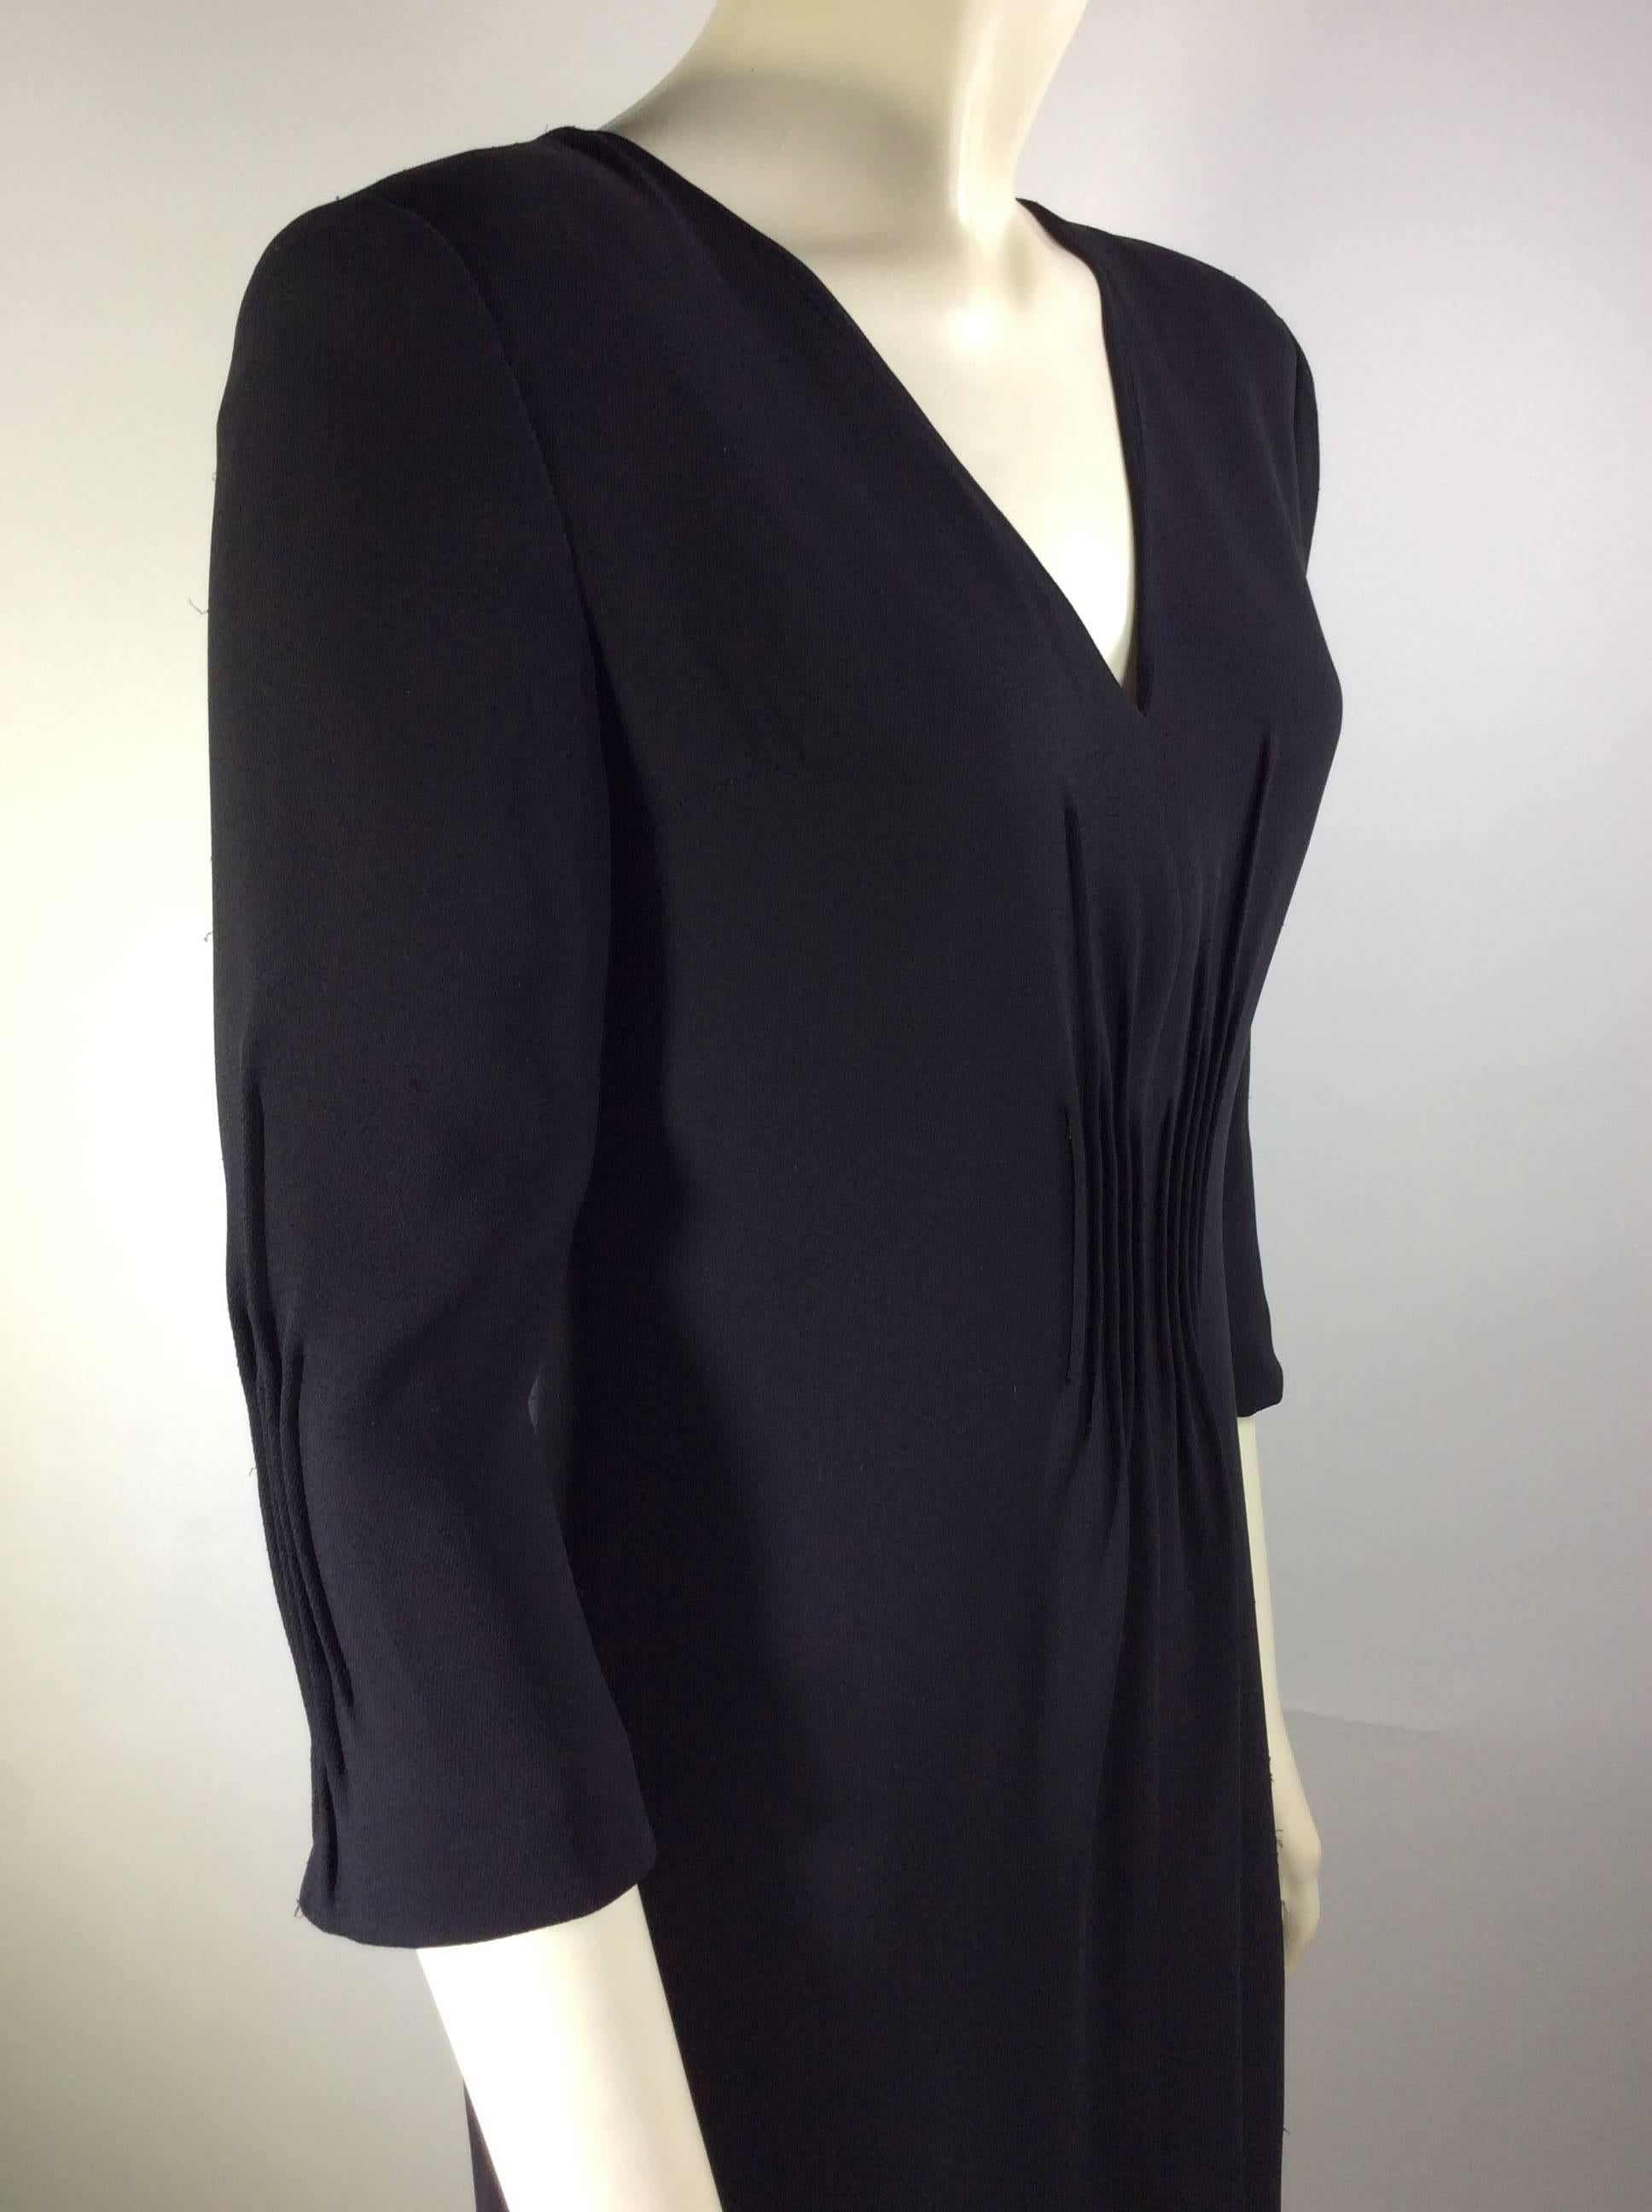 Giorgio Armani Black Crepe Detail on Front Dress
Mid Length Sleeve 
Small Slit in Front 
Zips up The Back
UK Size 38 (Equates US 8-10)